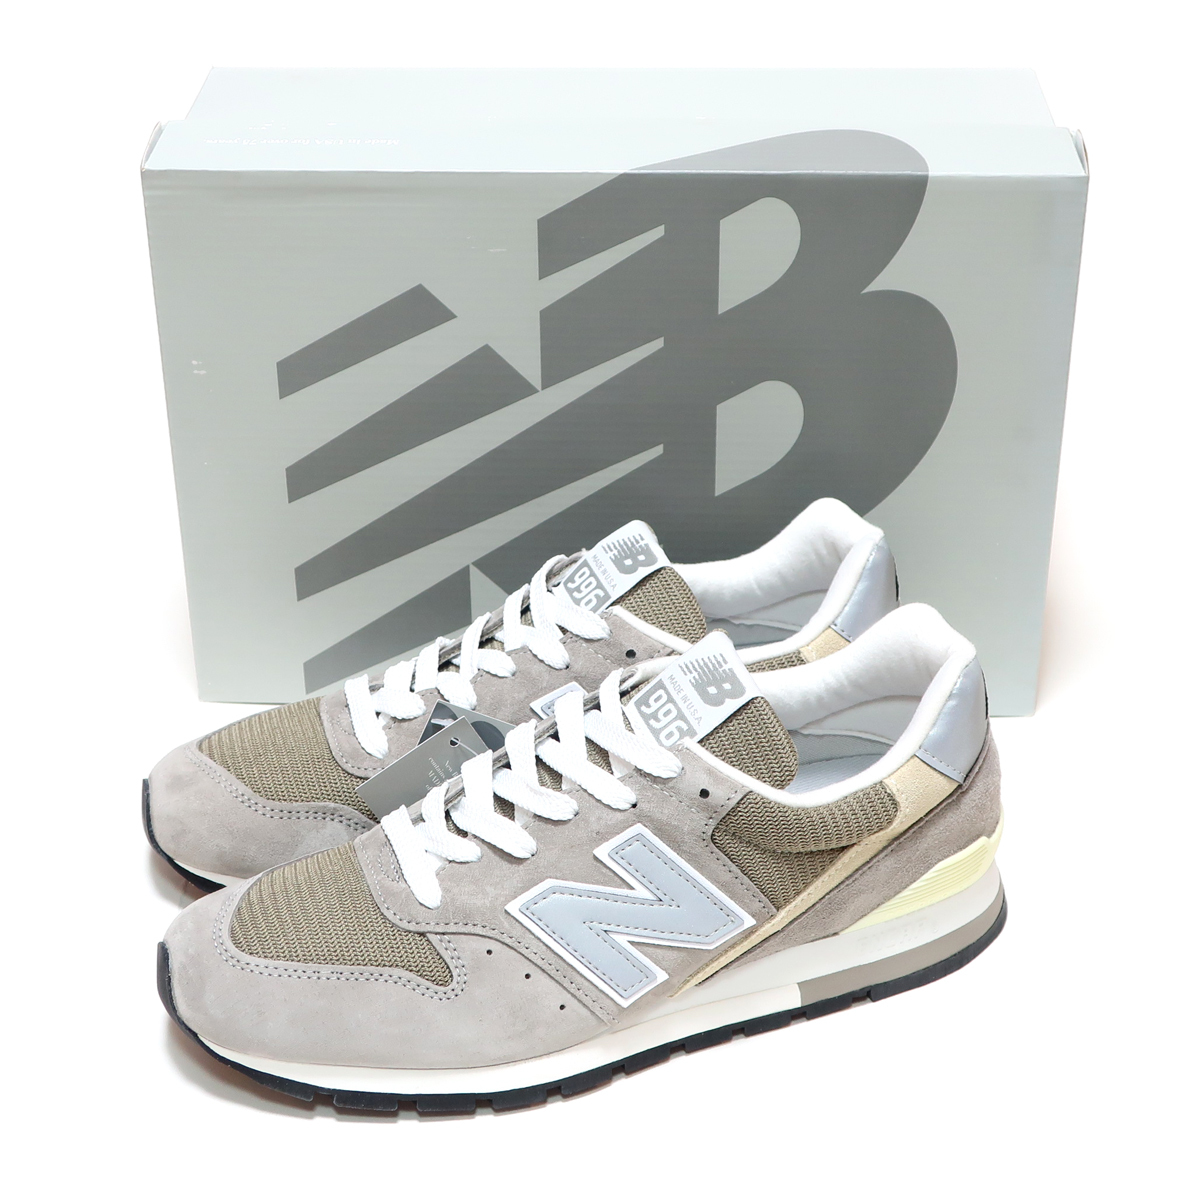 NEW BALANCE U996GR GRAY GREY SUEDE MADE IN USA US12 30cm ( ニューバランス 996 グレー スエード アメリカ製 )